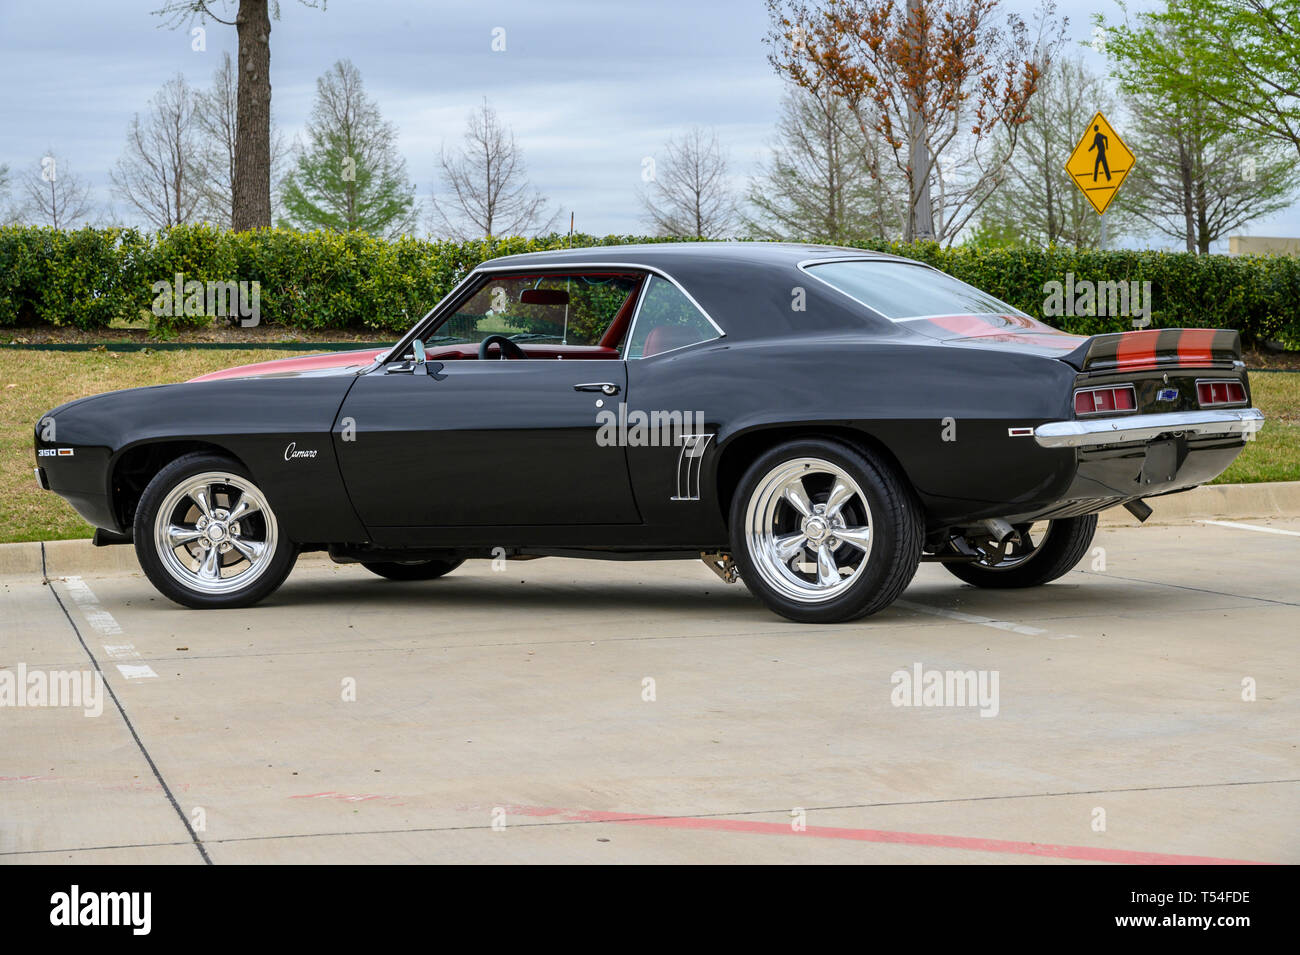 April 20, 2019: 1969 CAMARO SS RESTOMOD NEW 383 STROKER CRATE MOTOR LESS THAN ONE YEAR OLD NEW AFD ALUMINUM HEADS NEW HEADERS NEW FLOW MASTER MUFFLERS MSD DISTRIBUTER MSD IGNITION SERPENTINE BELT ELECTRIC FAN NEW QUICK FUEL CARB 750 DP COMPLETE NEW A/C AND HEAT POWER STEERING POWER BRAKES FRONT DISK AND REAR DRUM MUNCIE 220 4 SPEED TRANS NEW EATON POSI GEARS NEW NOS N20 WITH INSTALLED OUTLET PLATE BOTTLE AND LINE. NEVER USED ABSOLUTLY NO RUST OR BONDO REPAIRS COMPLETE DEEP PAINT IS LESS THAN 2 YEARS OLD NEW AMERICAN RACING WHEELS AND TIRES NEW RED SEATS CARPET DOOR PANELS NEW KENWOOD AMFMCD AU Stock Photo